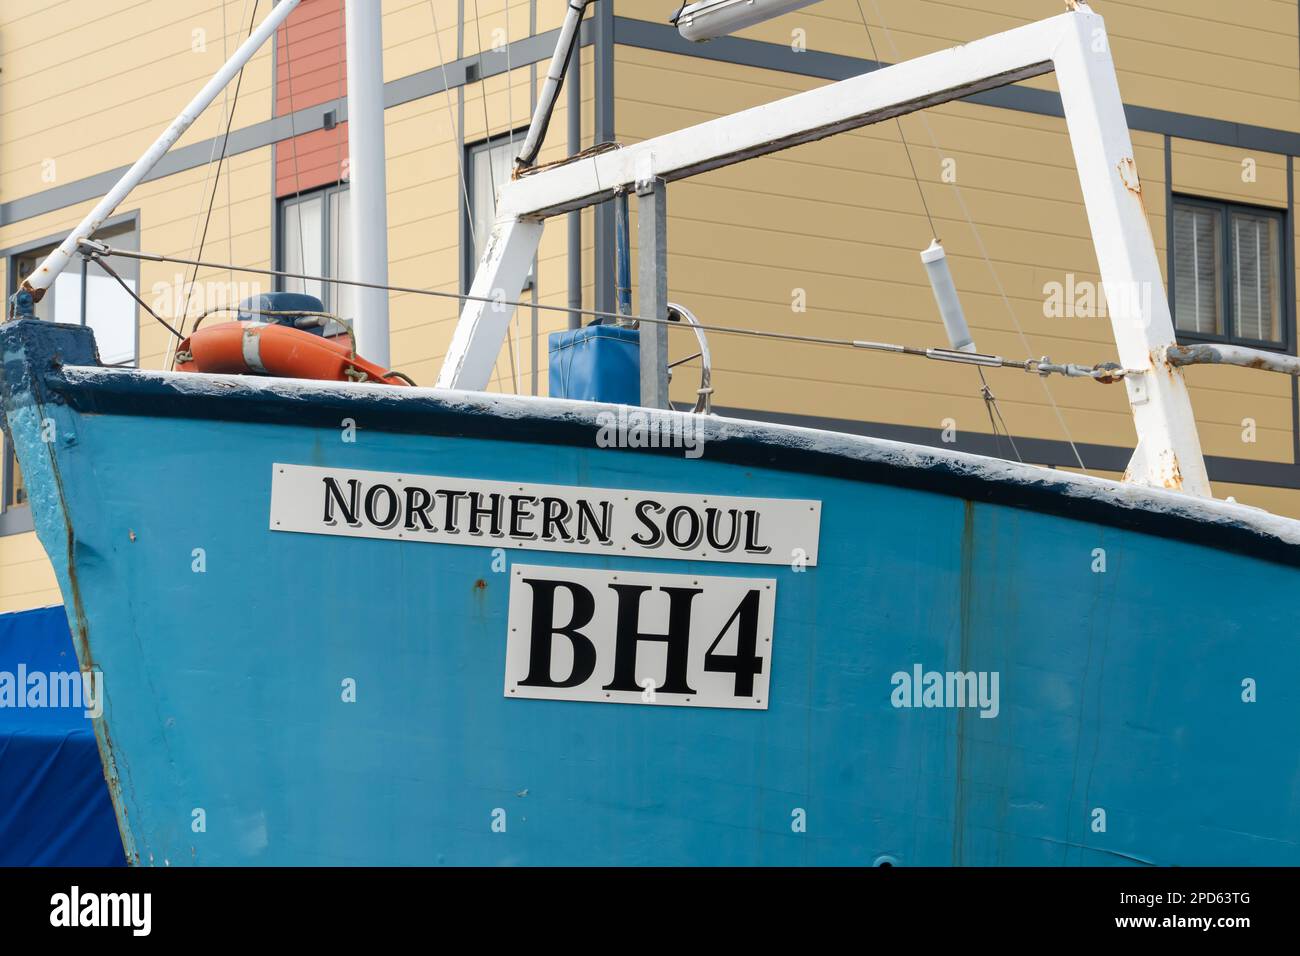 The boat, Northern Soul, on land by the marina in the town of Amble, Northumberland, UK. Stock Photo